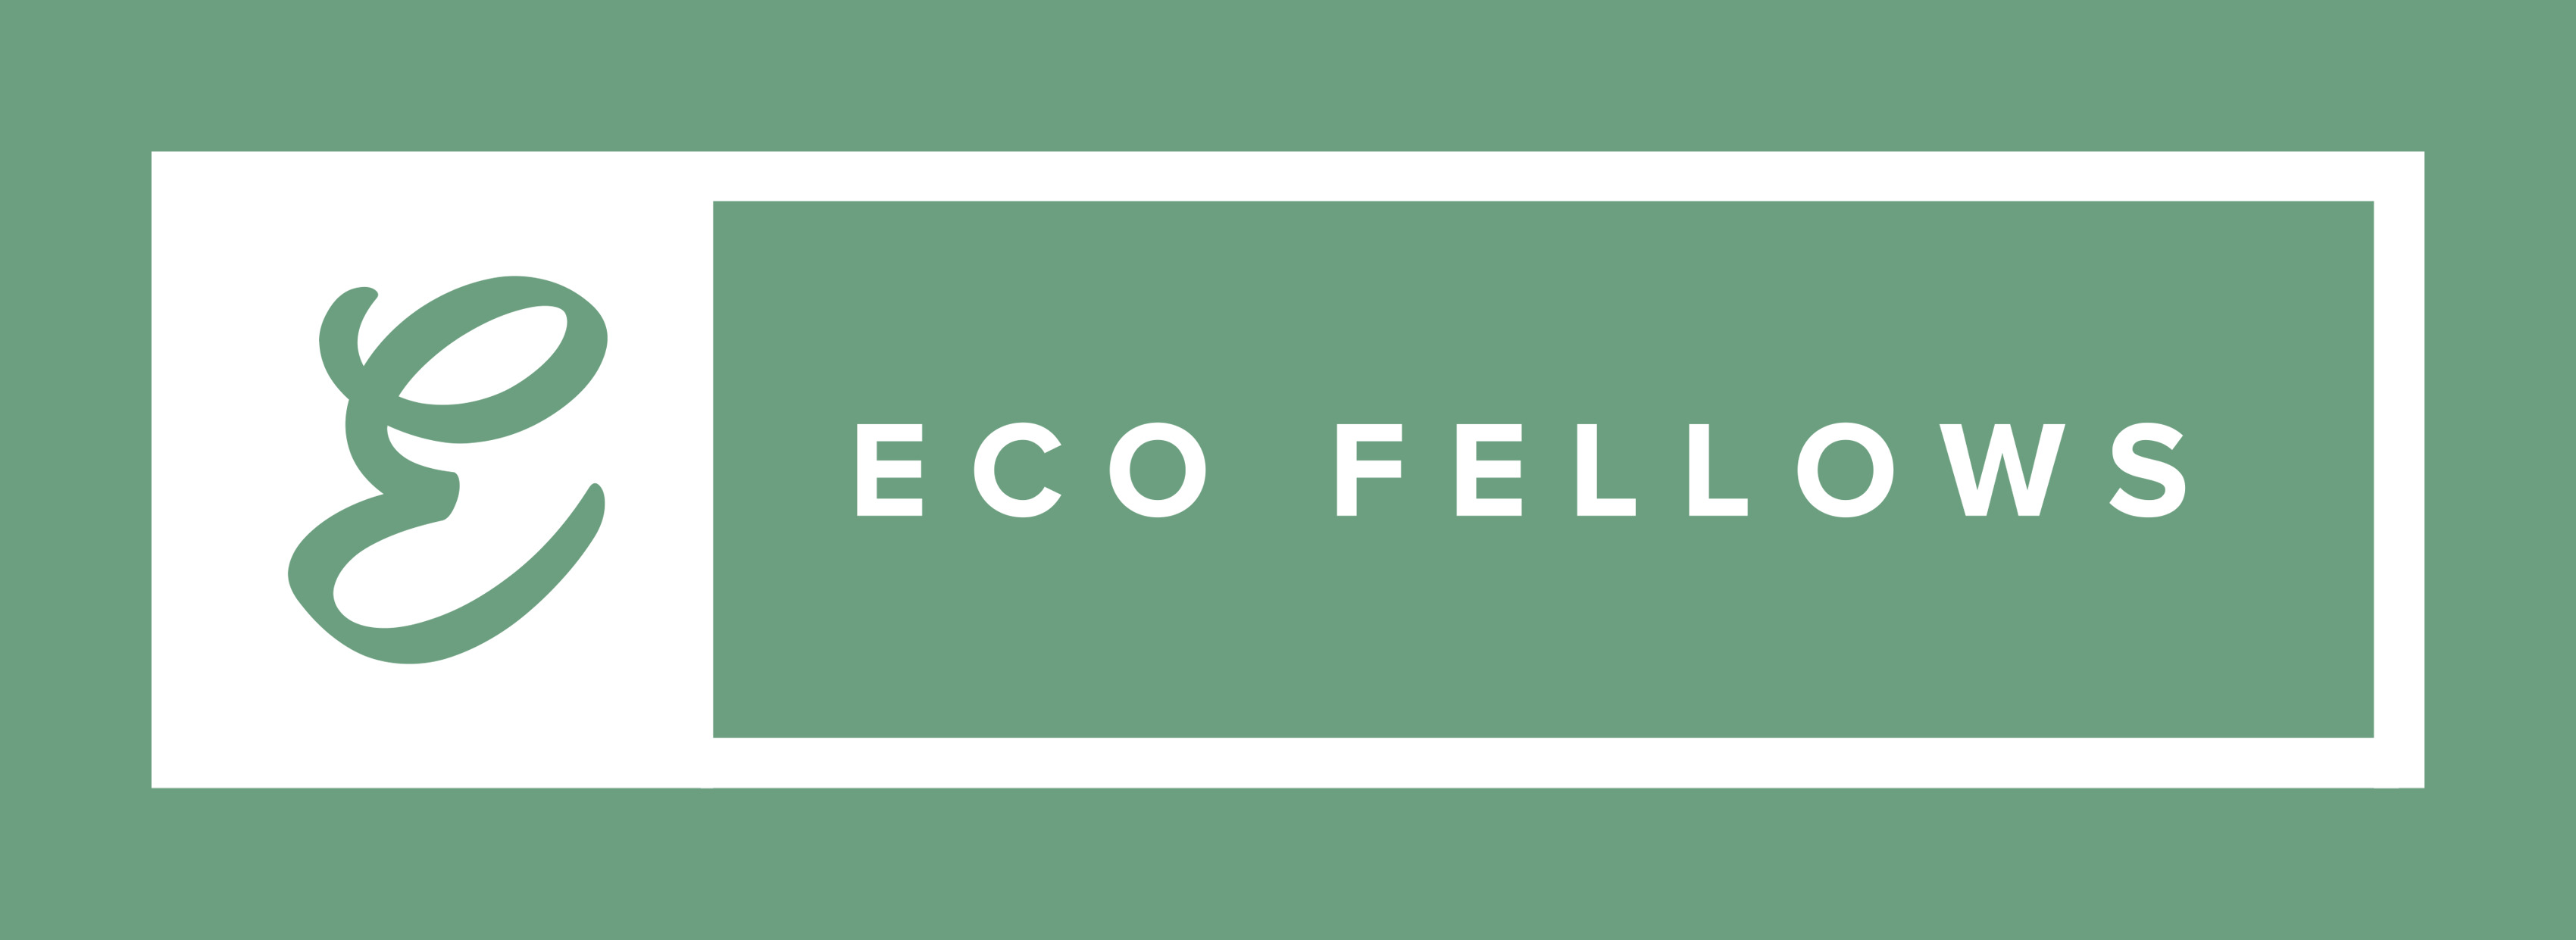 More about Eco Fellows Academy 